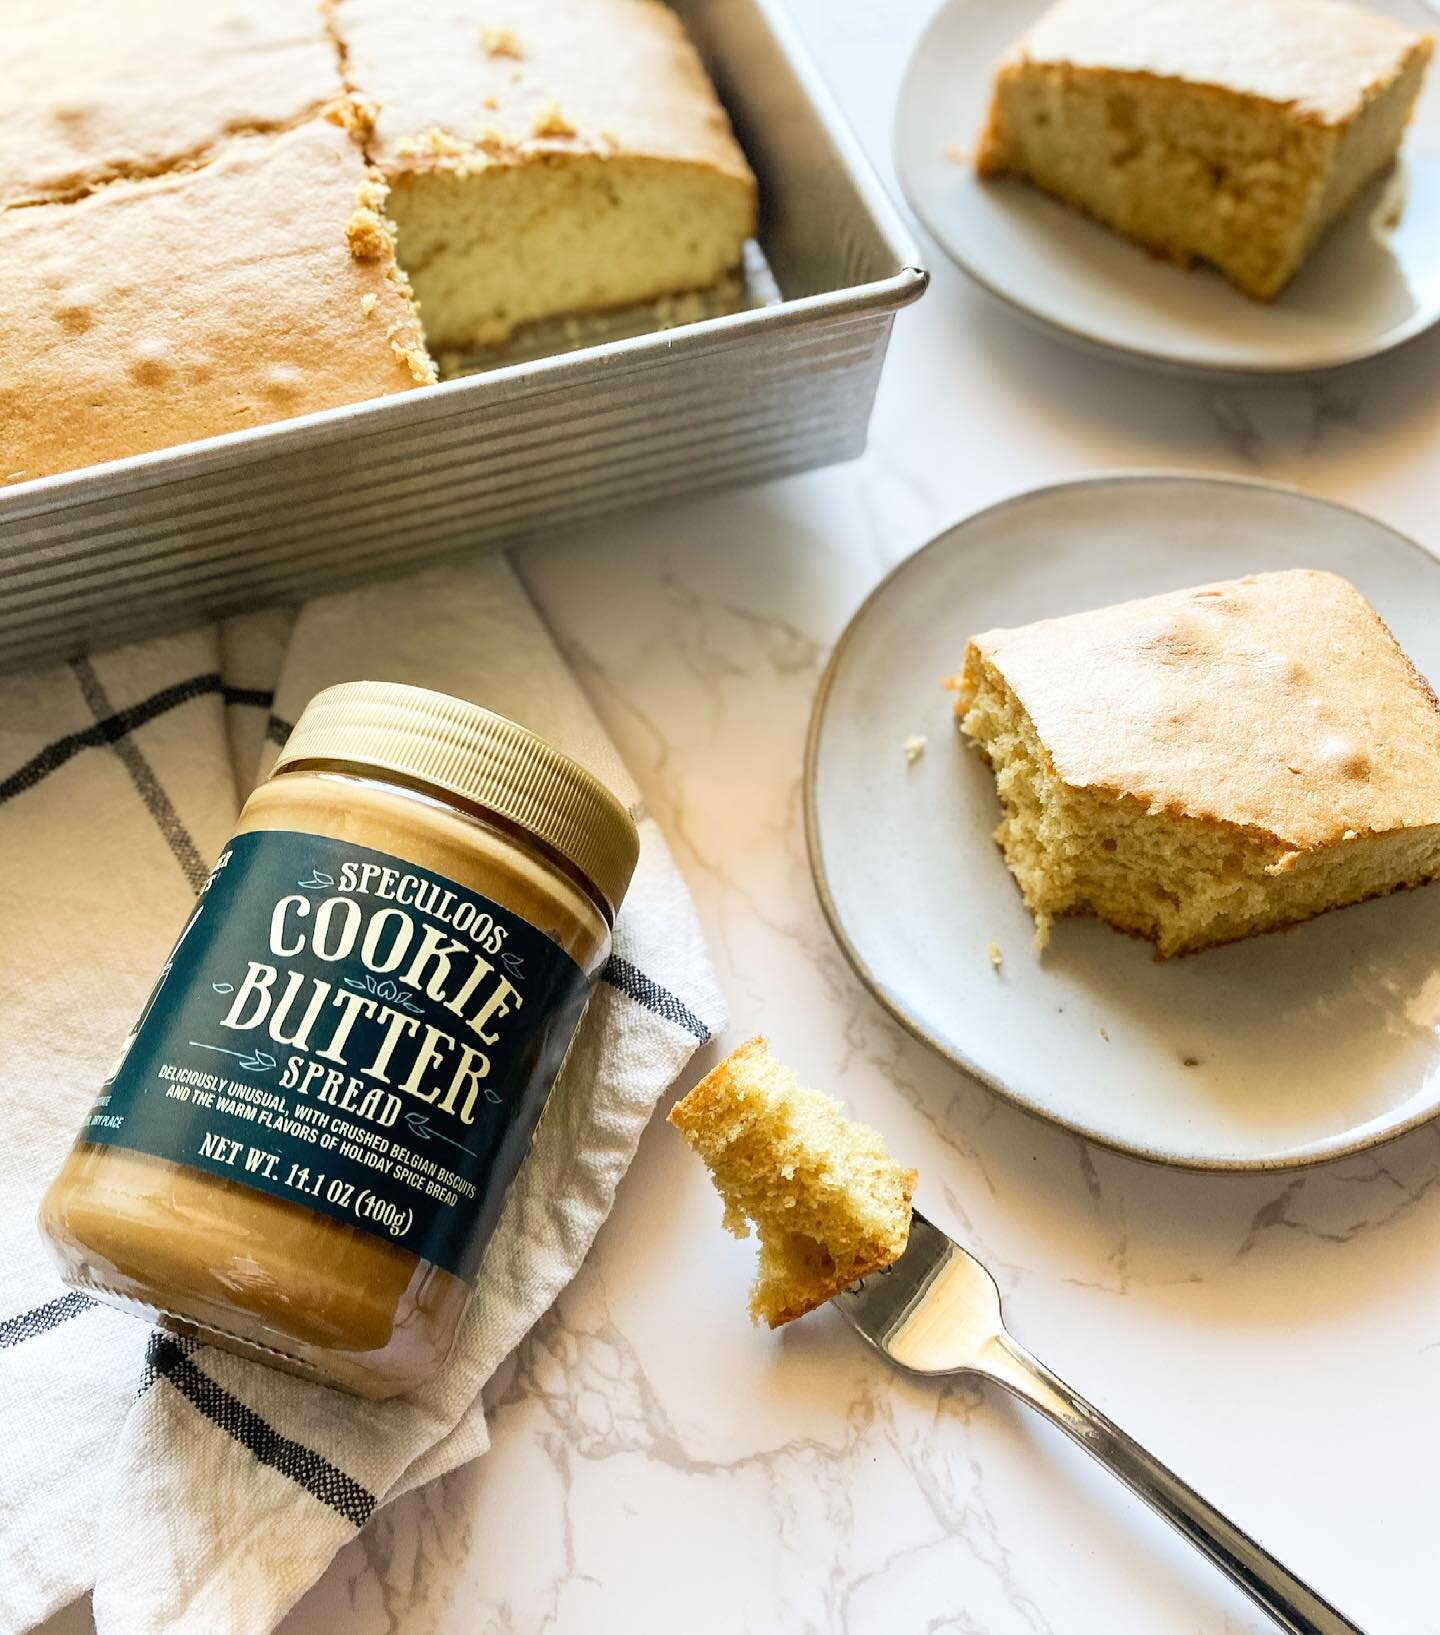 Start your week off with this easy 4 INGREDIENT COOKIE BUTTER CAKE 🙌🏼 this is my new go to cake recipe for bday parties 🎂 get the recipe from @mashedfood